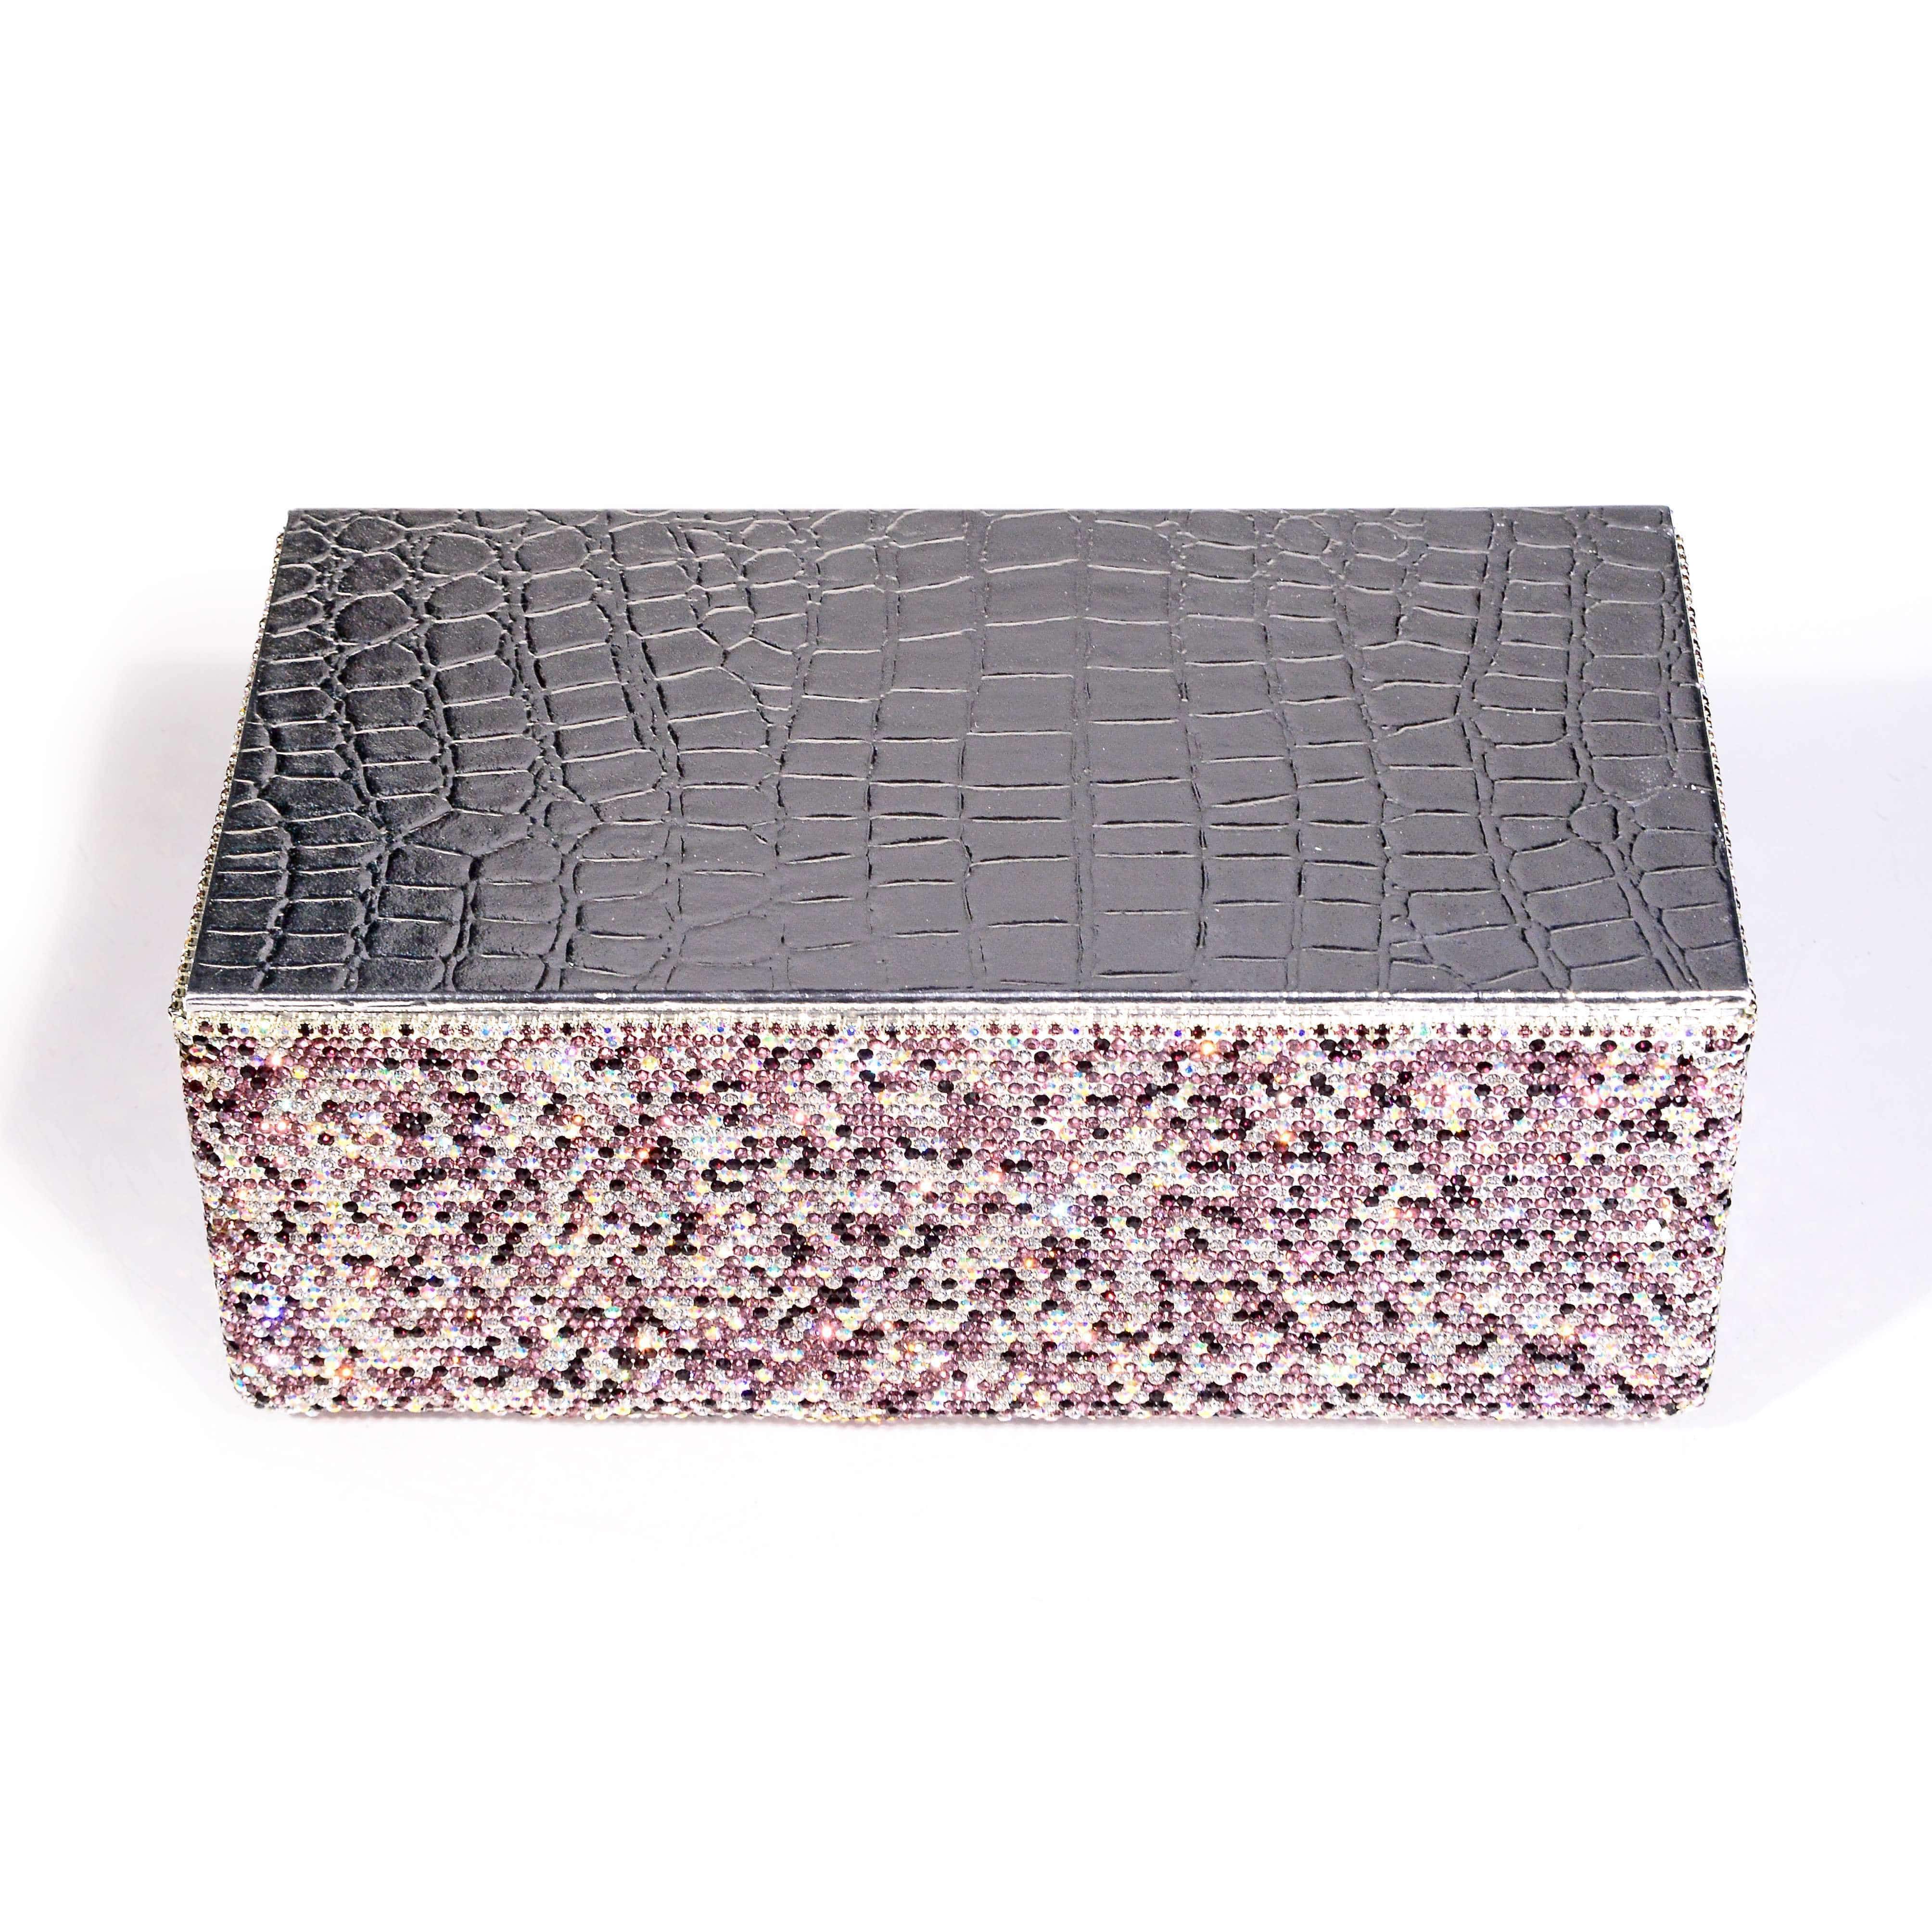 Kalifano Jeweled Accessories STB400-PE - Tissue Box made w/ Crystals STB400-PE